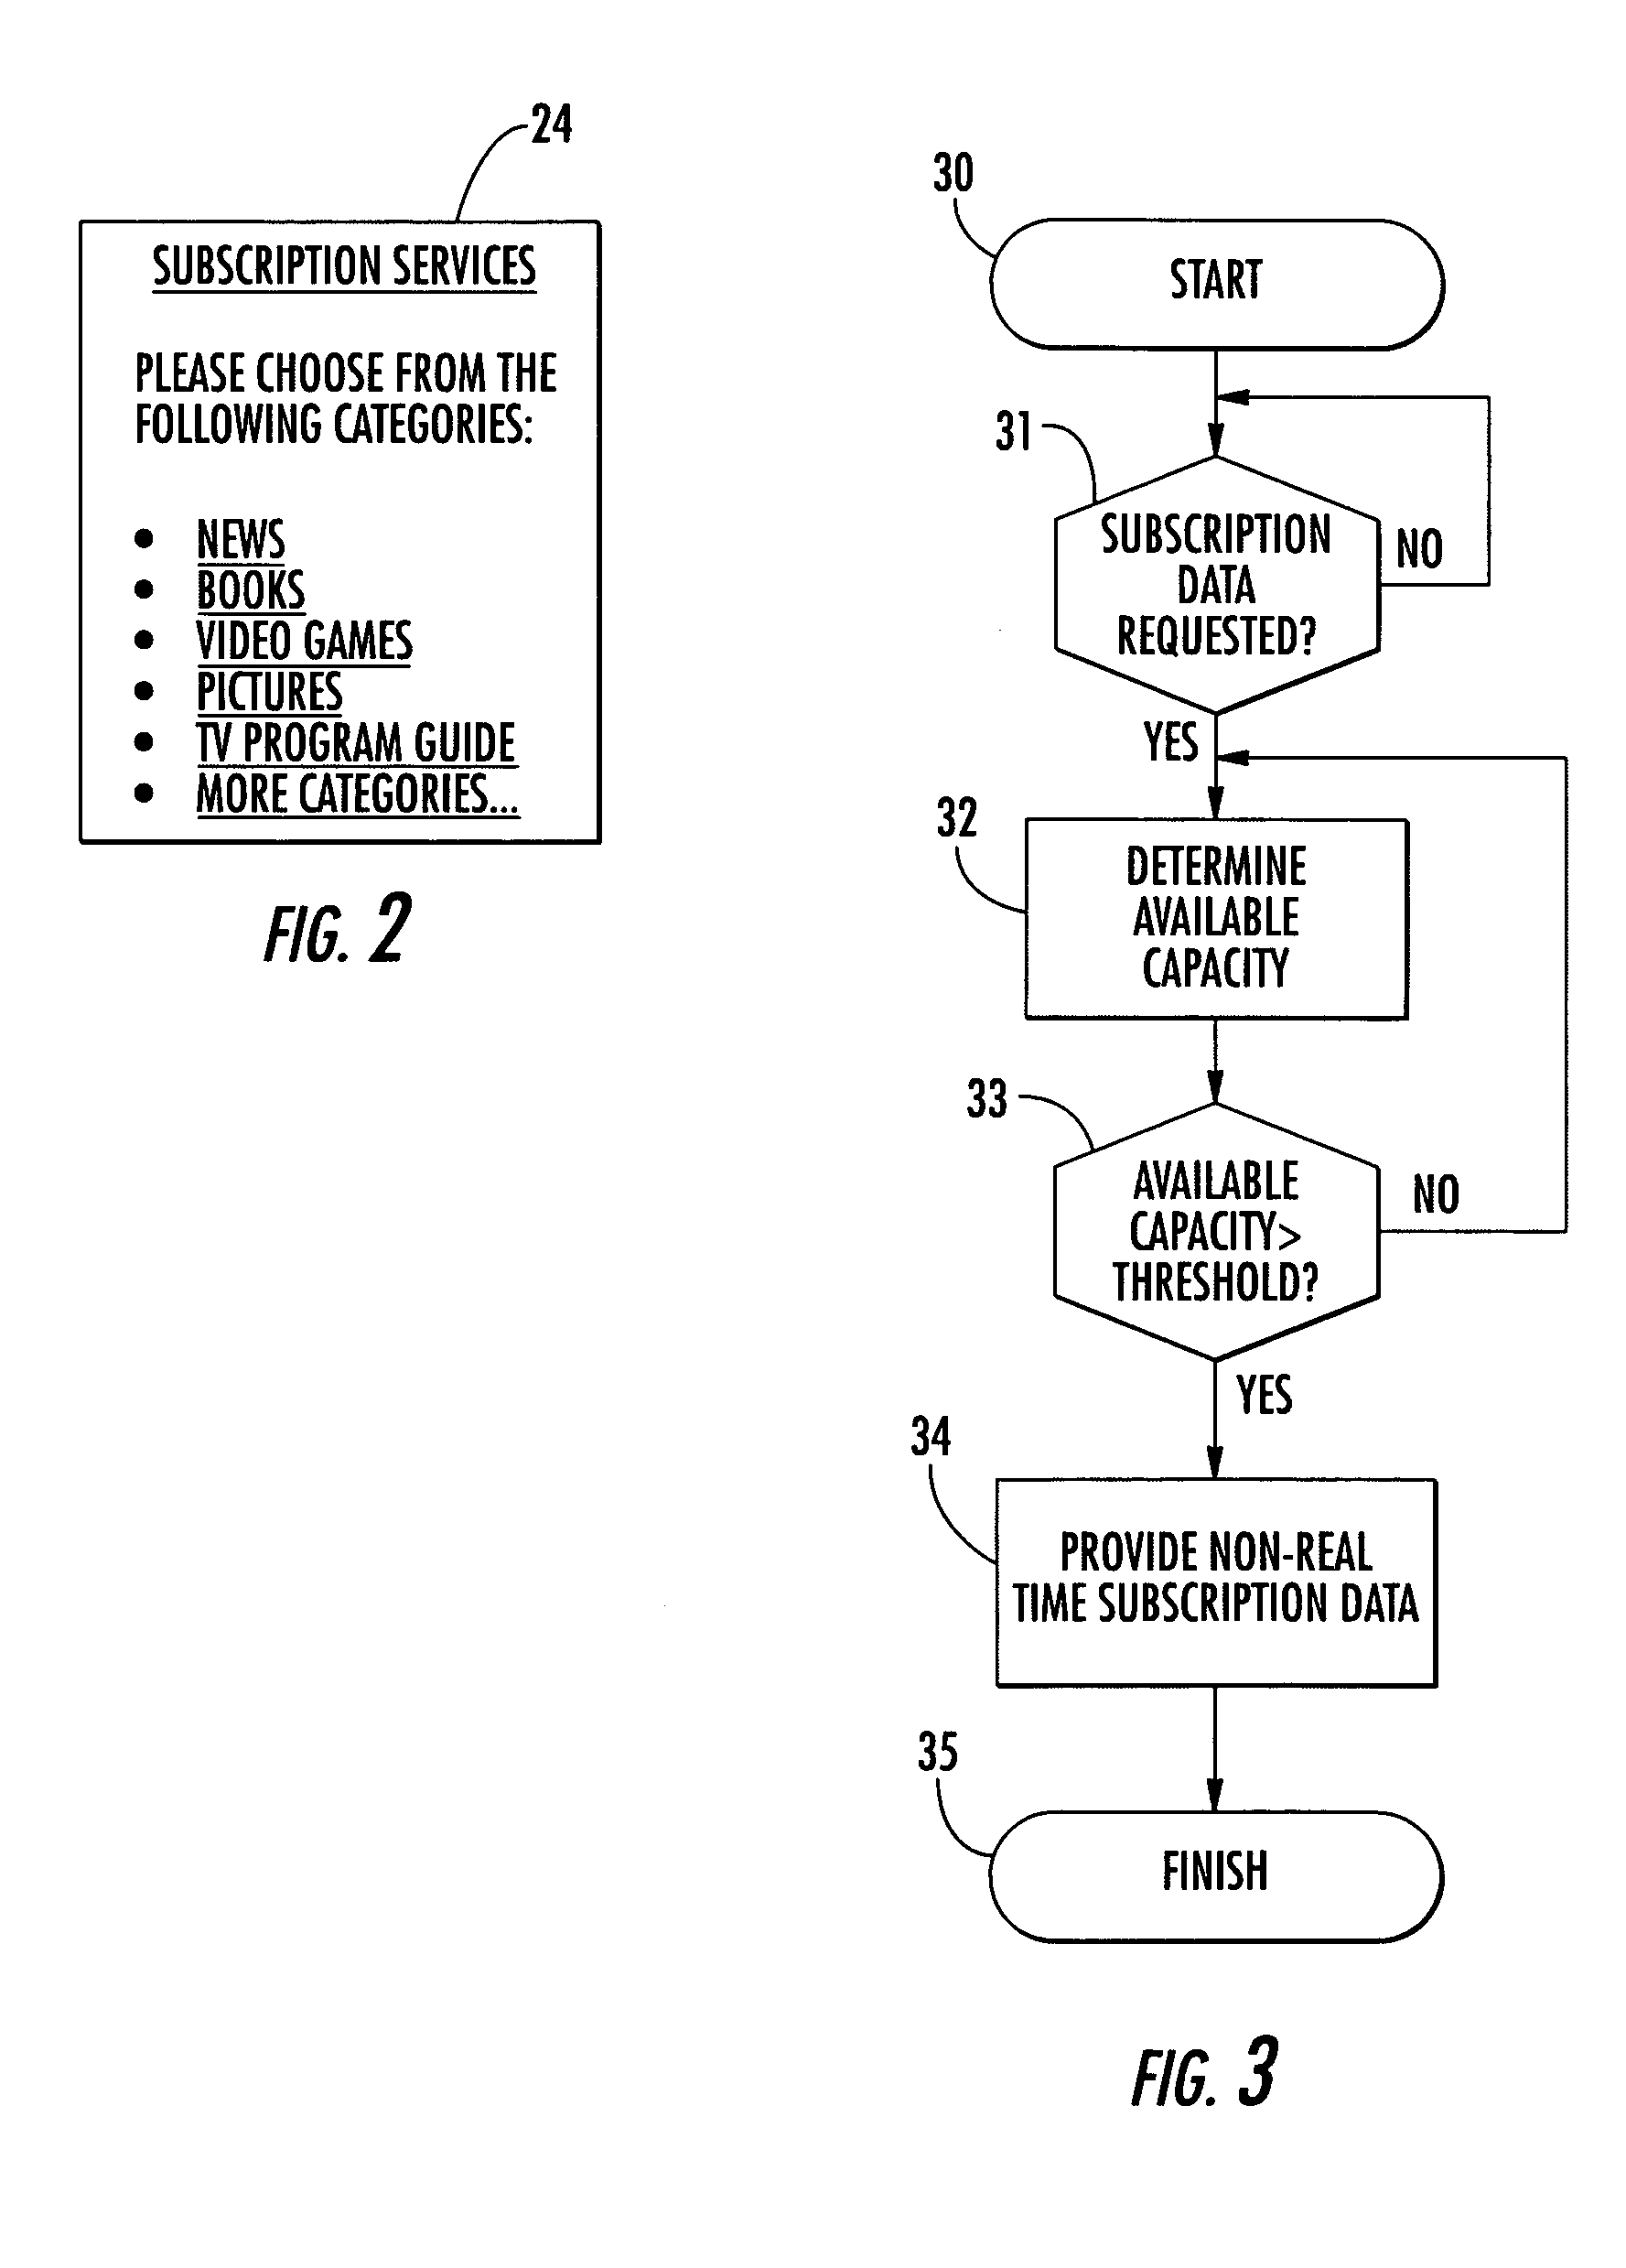 Cellular communications system for providing non-real time subscription data and related methods